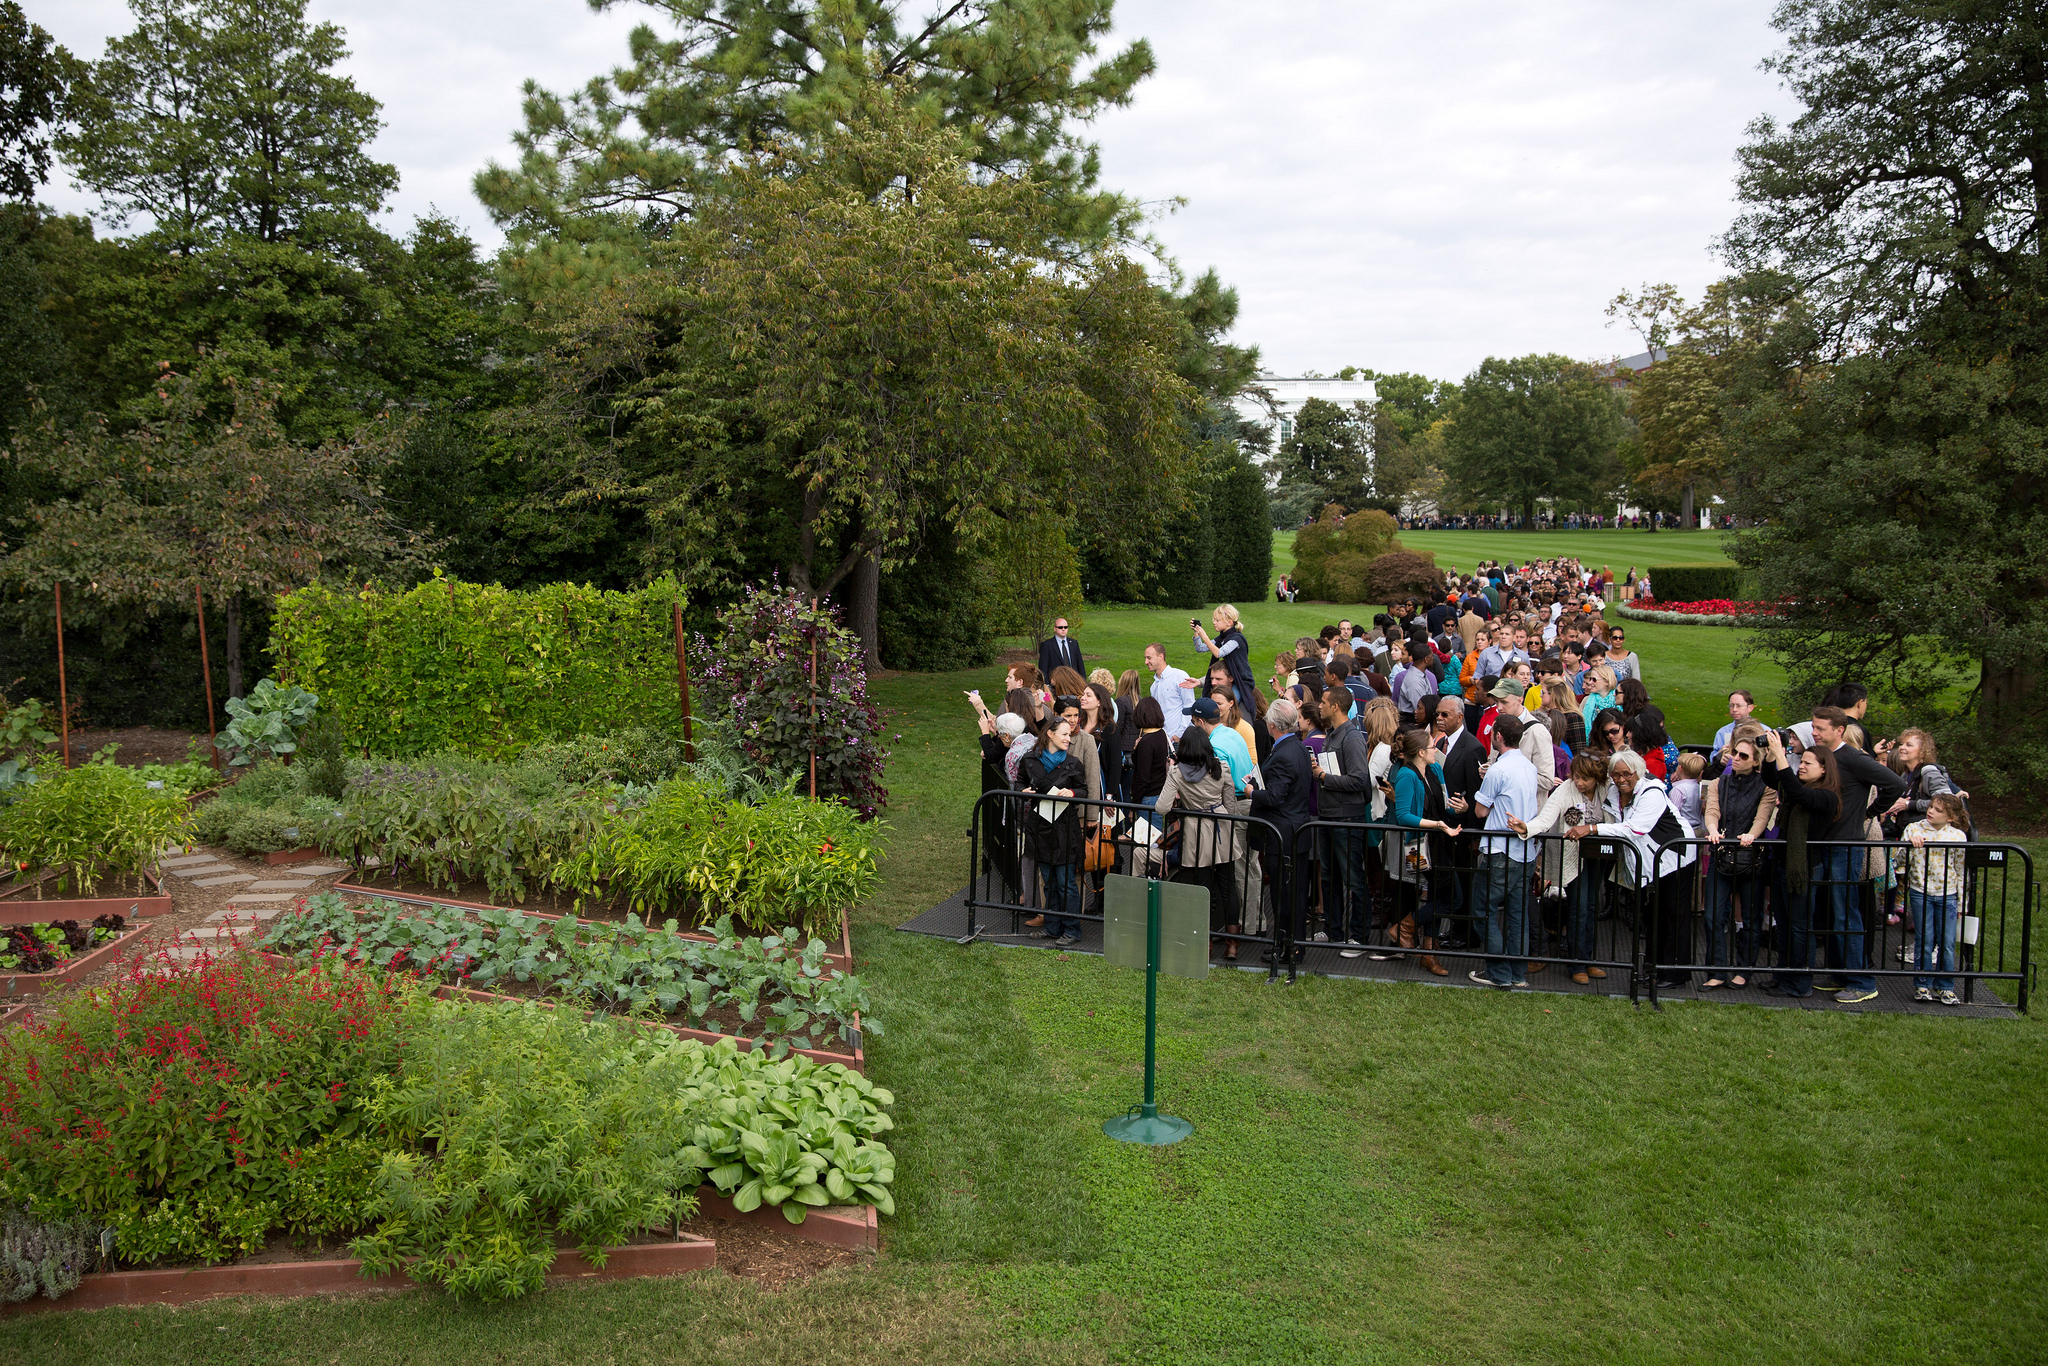 What we learned in the garden with former White House chef and